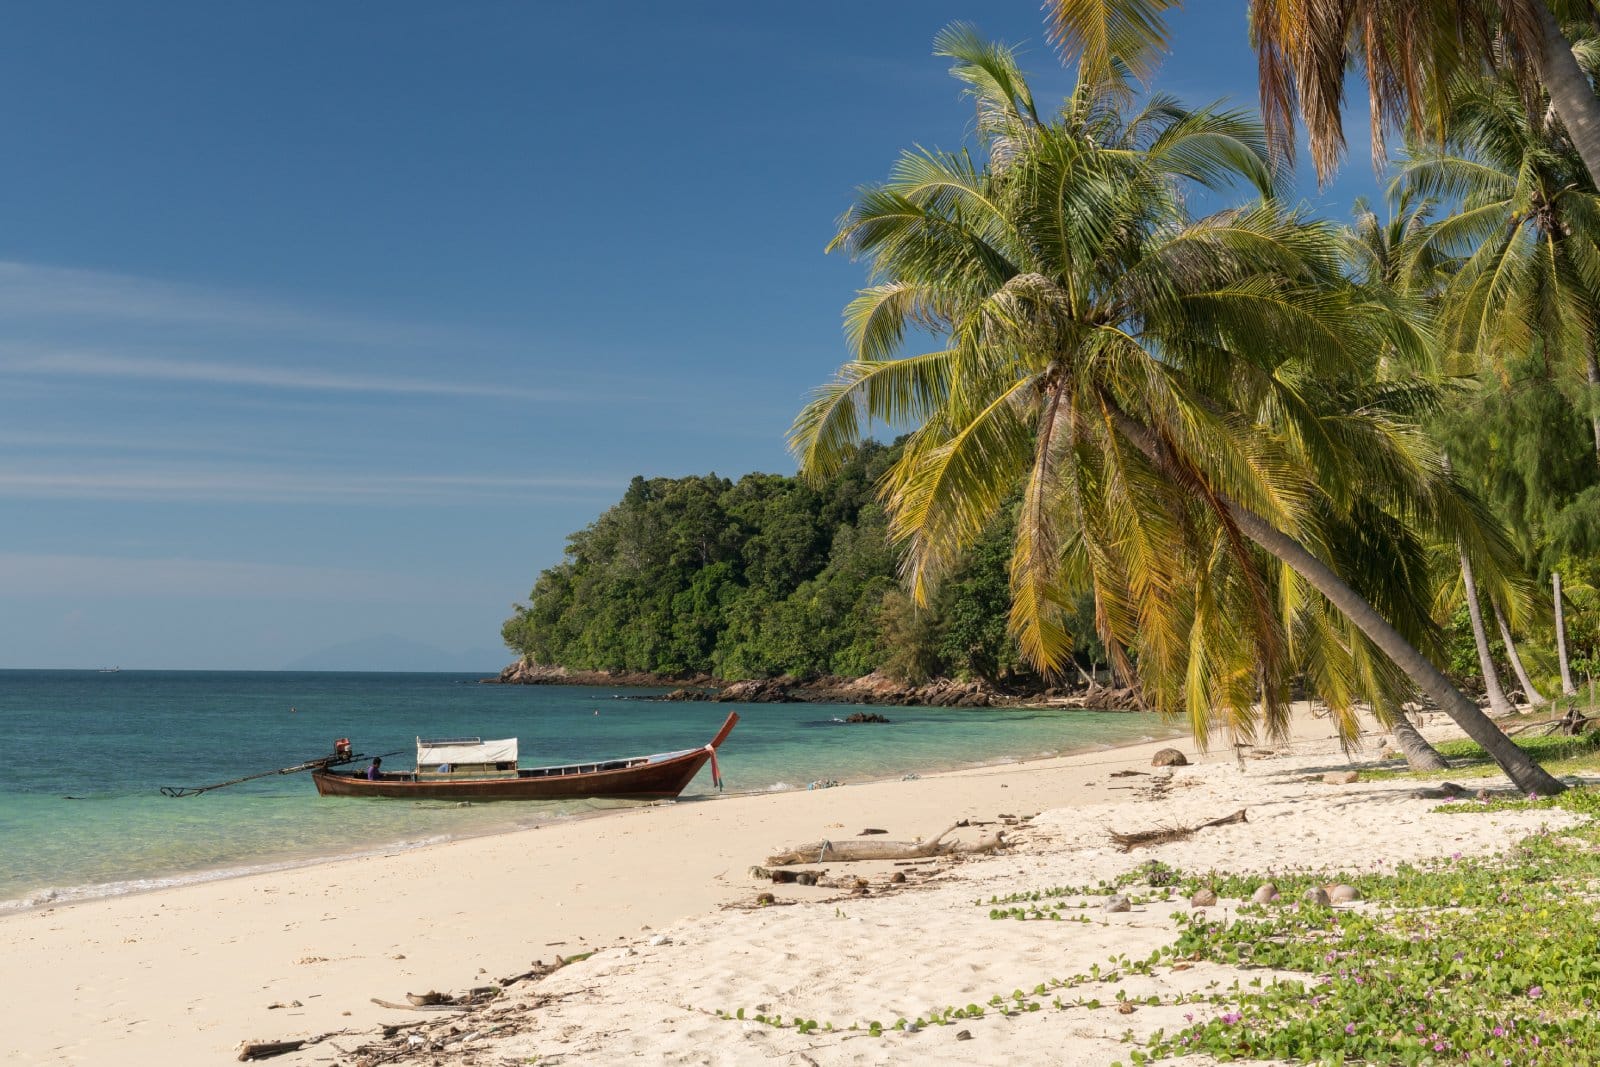 <p class="wp-caption-text">Image Credit: Shutterstock / Michelle Holihan</p>  <p><span>Koh Bulon Lae is a testament to tranquility and sustainable living, starkly contrasting Thailand’s more commercialized islands. This small island paradise in the Satun Province has lush jungles, white sandy beaches, and crystal-clear waters, providing a serene backdrop for a relaxing getaway. The local communities here, including the Moken Sea Nomads, live in harmony with their surroundings, offering insights into a lifestyle that prioritizes environmental preservation and simplicity. The island’s commitment to eco-tourism is evident in its minimal development, with a handful of low-impact resorts and bungalows emphasizing conservation and cultural respect. The beaches, particularly Panka Yai and Panka Noi, are perfect for those seeking solitude and a chance to connect with nature, while the surrounding coral reefs offer snorkelers a vibrant underwater world to explore. Koh Bulon Lae is a destination where time seems to stand still, inviting visitors to step into a slower pace of life and embrace the beauty of unspoiled nature.</span></p>